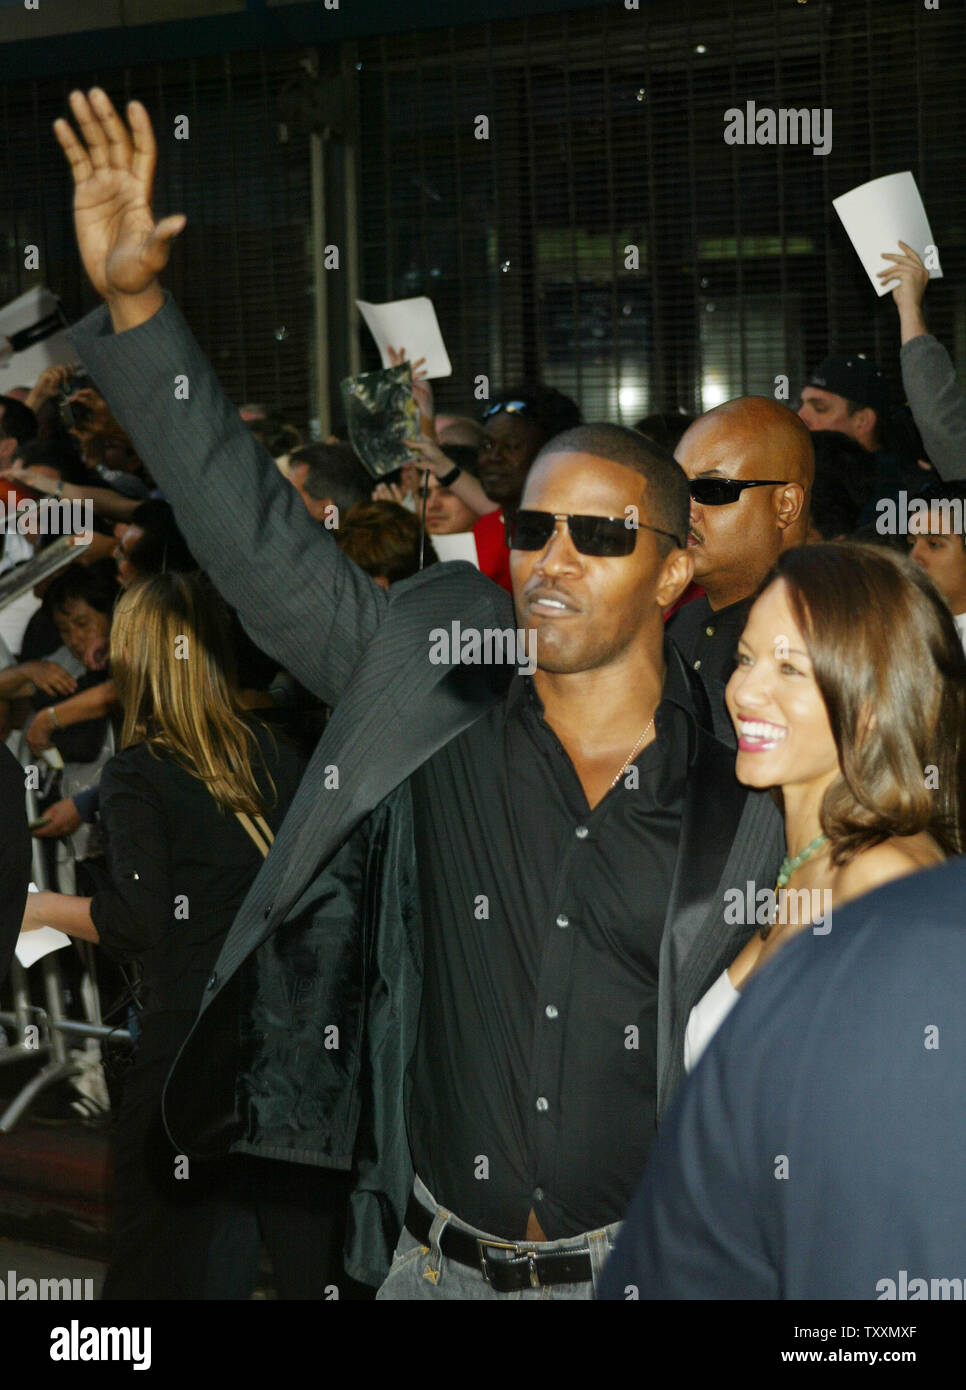 Actor Jamie Foxx waves to his fans with friend Leila Arcieri at the premiere for the film, 'Collateral' in Los Angeles on August  2, 2004. The DreamWorks Pictures film stars Tom Cruise and Jamie Foxx and opens in the US on August 6th. (UPI Photo/Francis Specker) Stock Photo